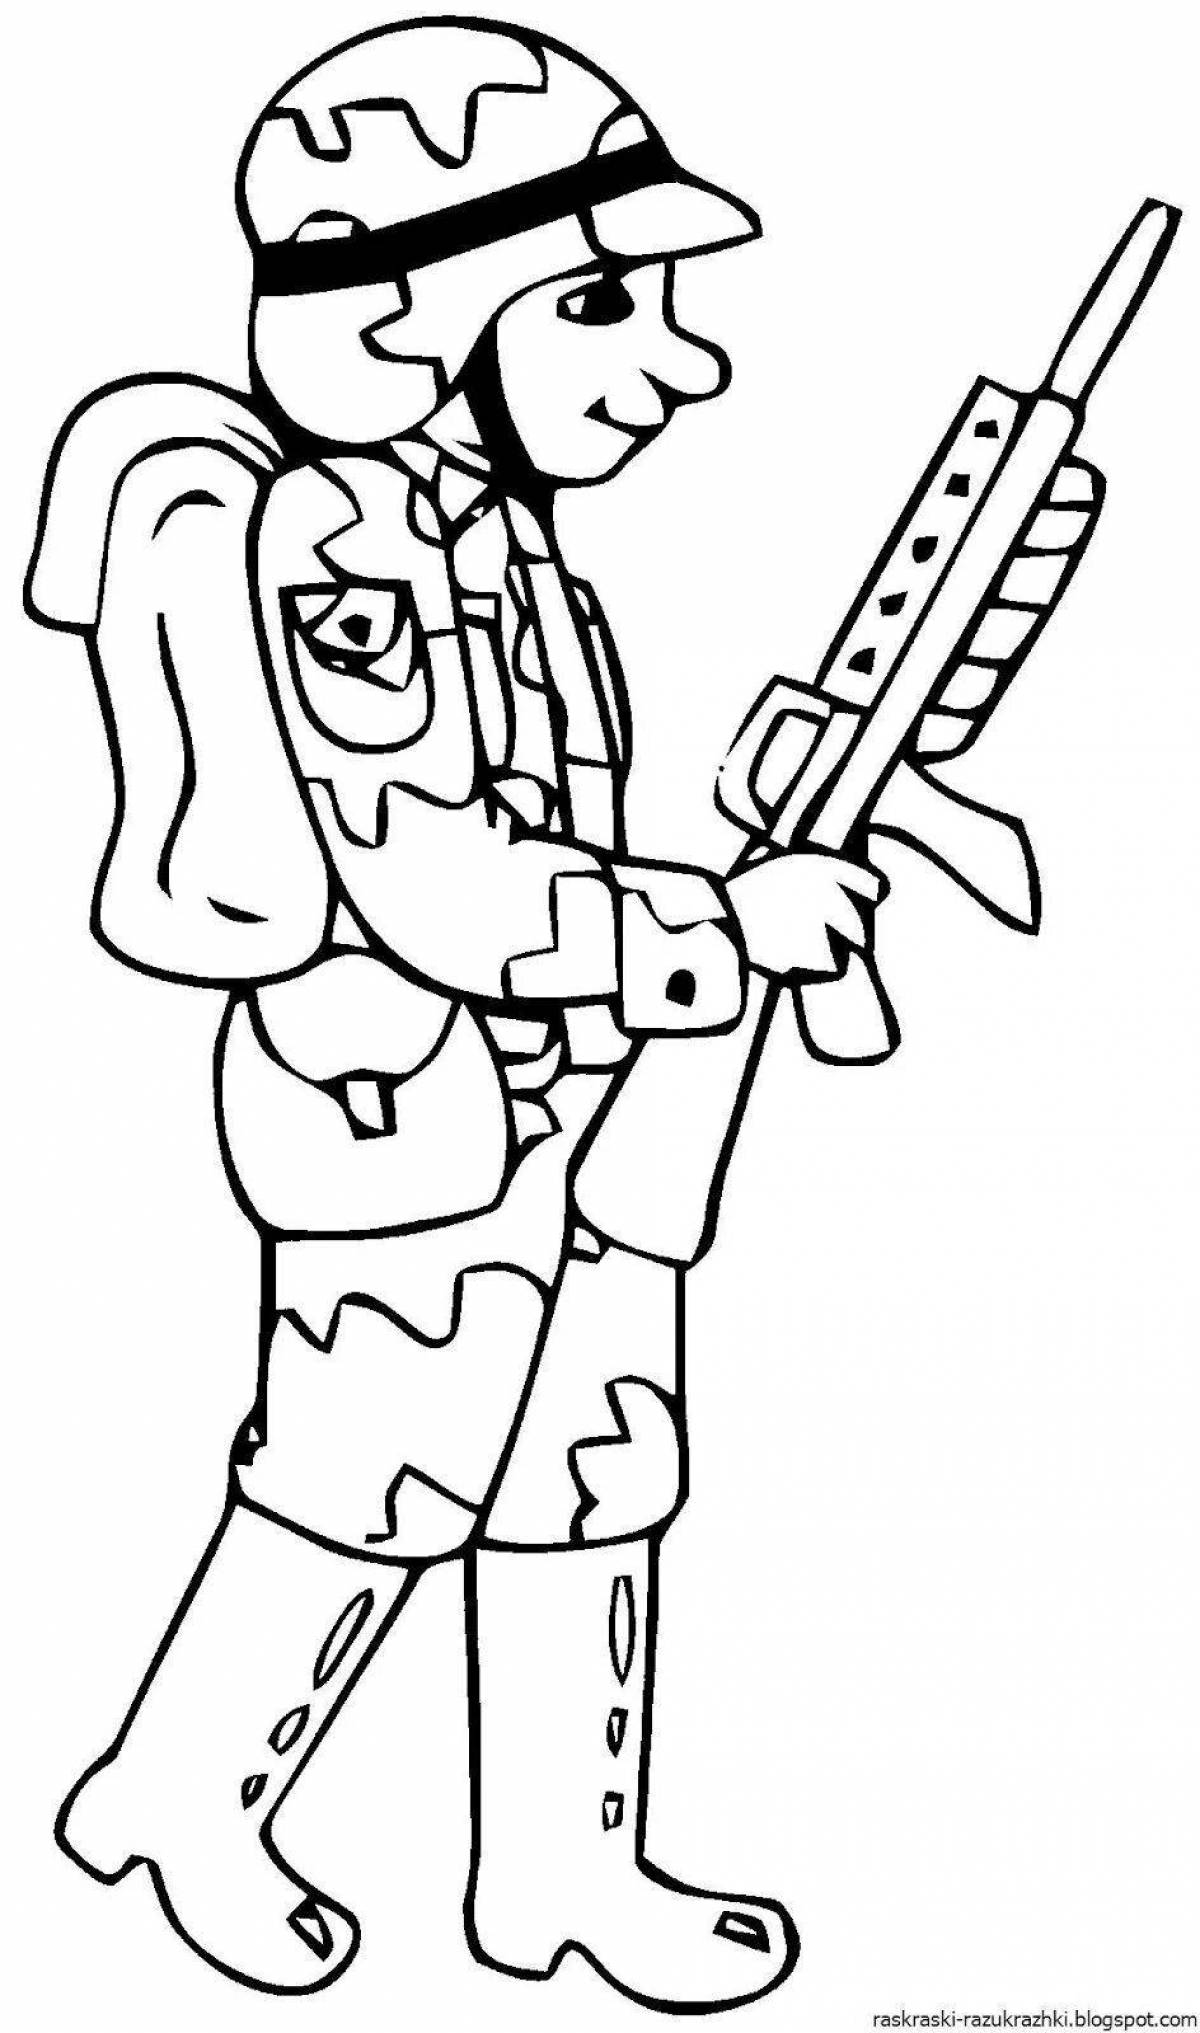 Glorious soldiers coloring pages for kids